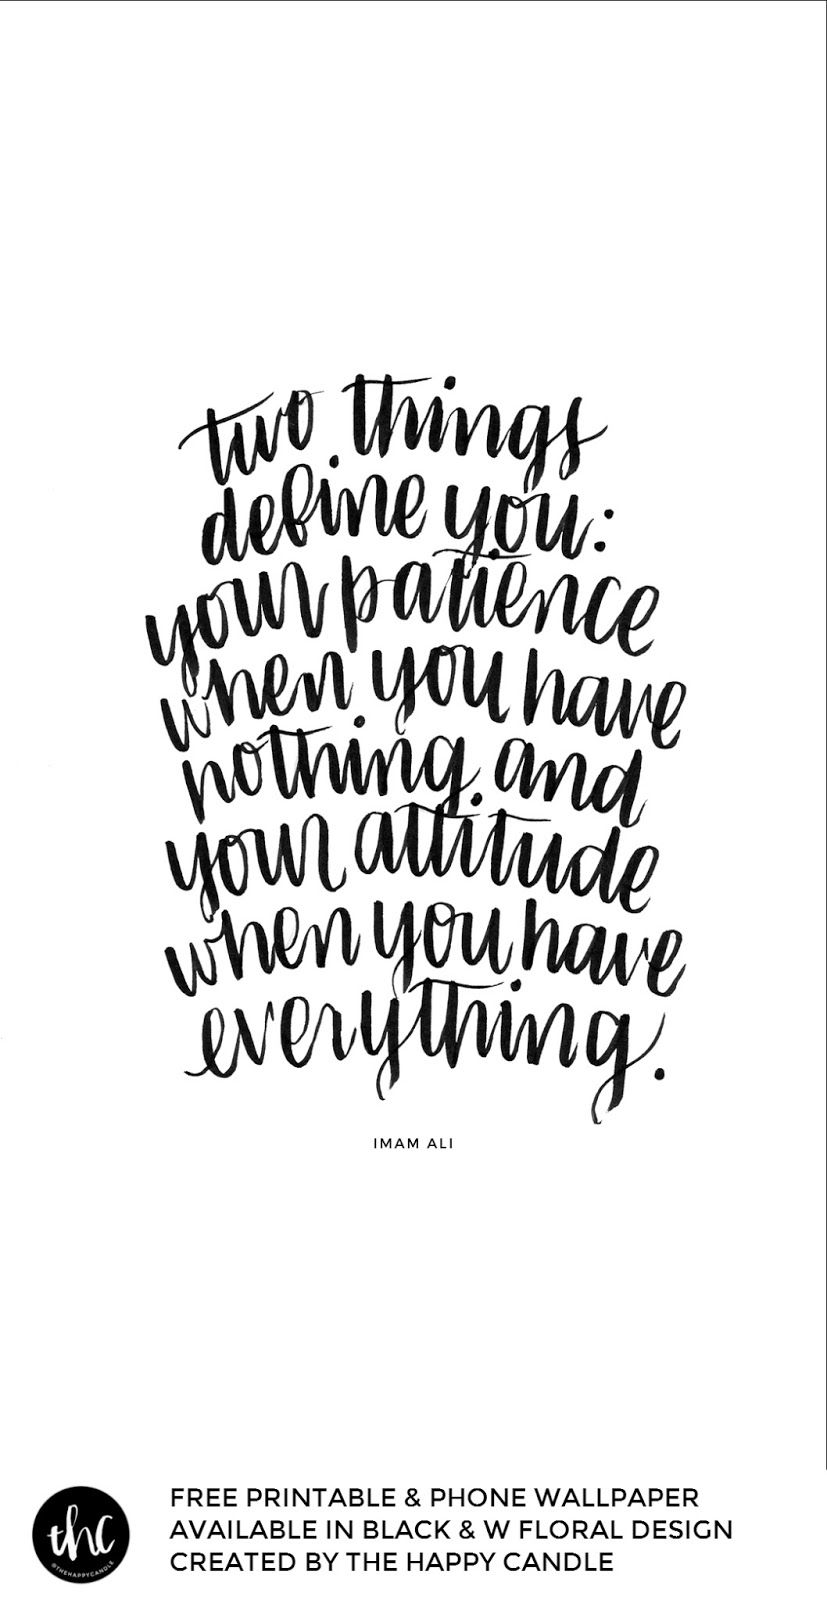 Printable And Phone Wallpaper Two Things Define You Your